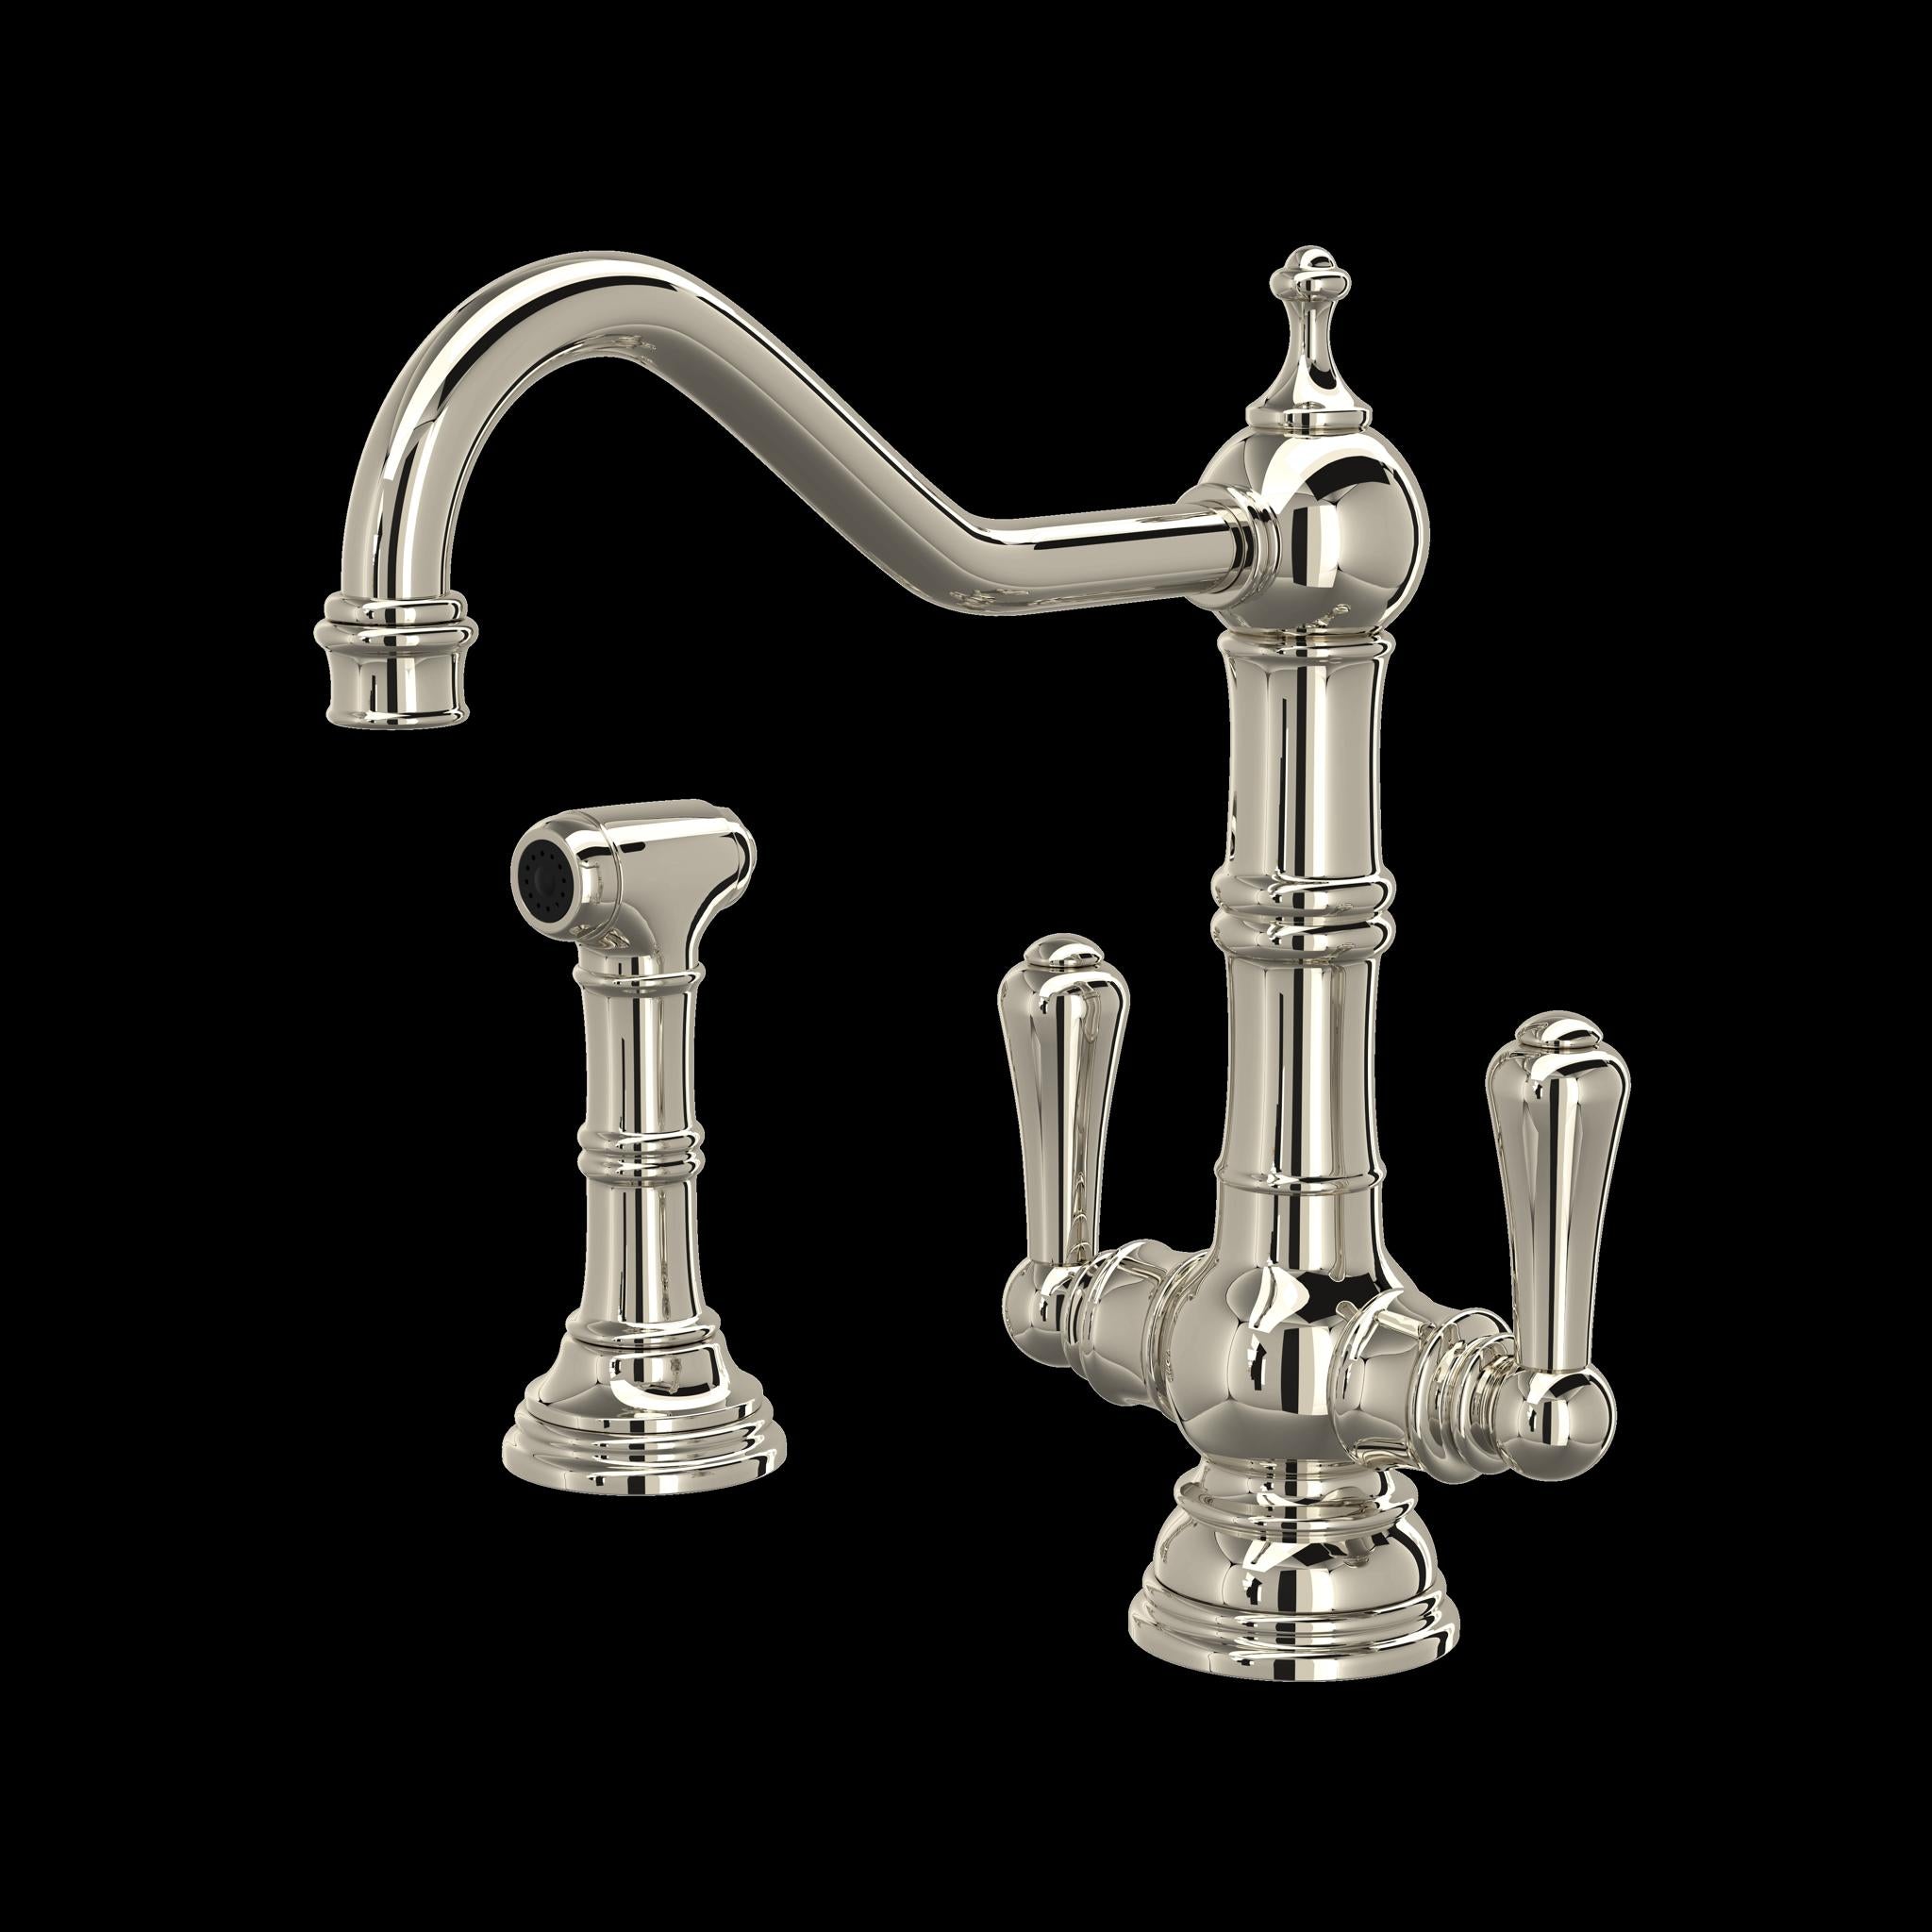 Perrin & Rowe U.4766 Edwardian Two Handle Kitchen Faucet With Side Spray